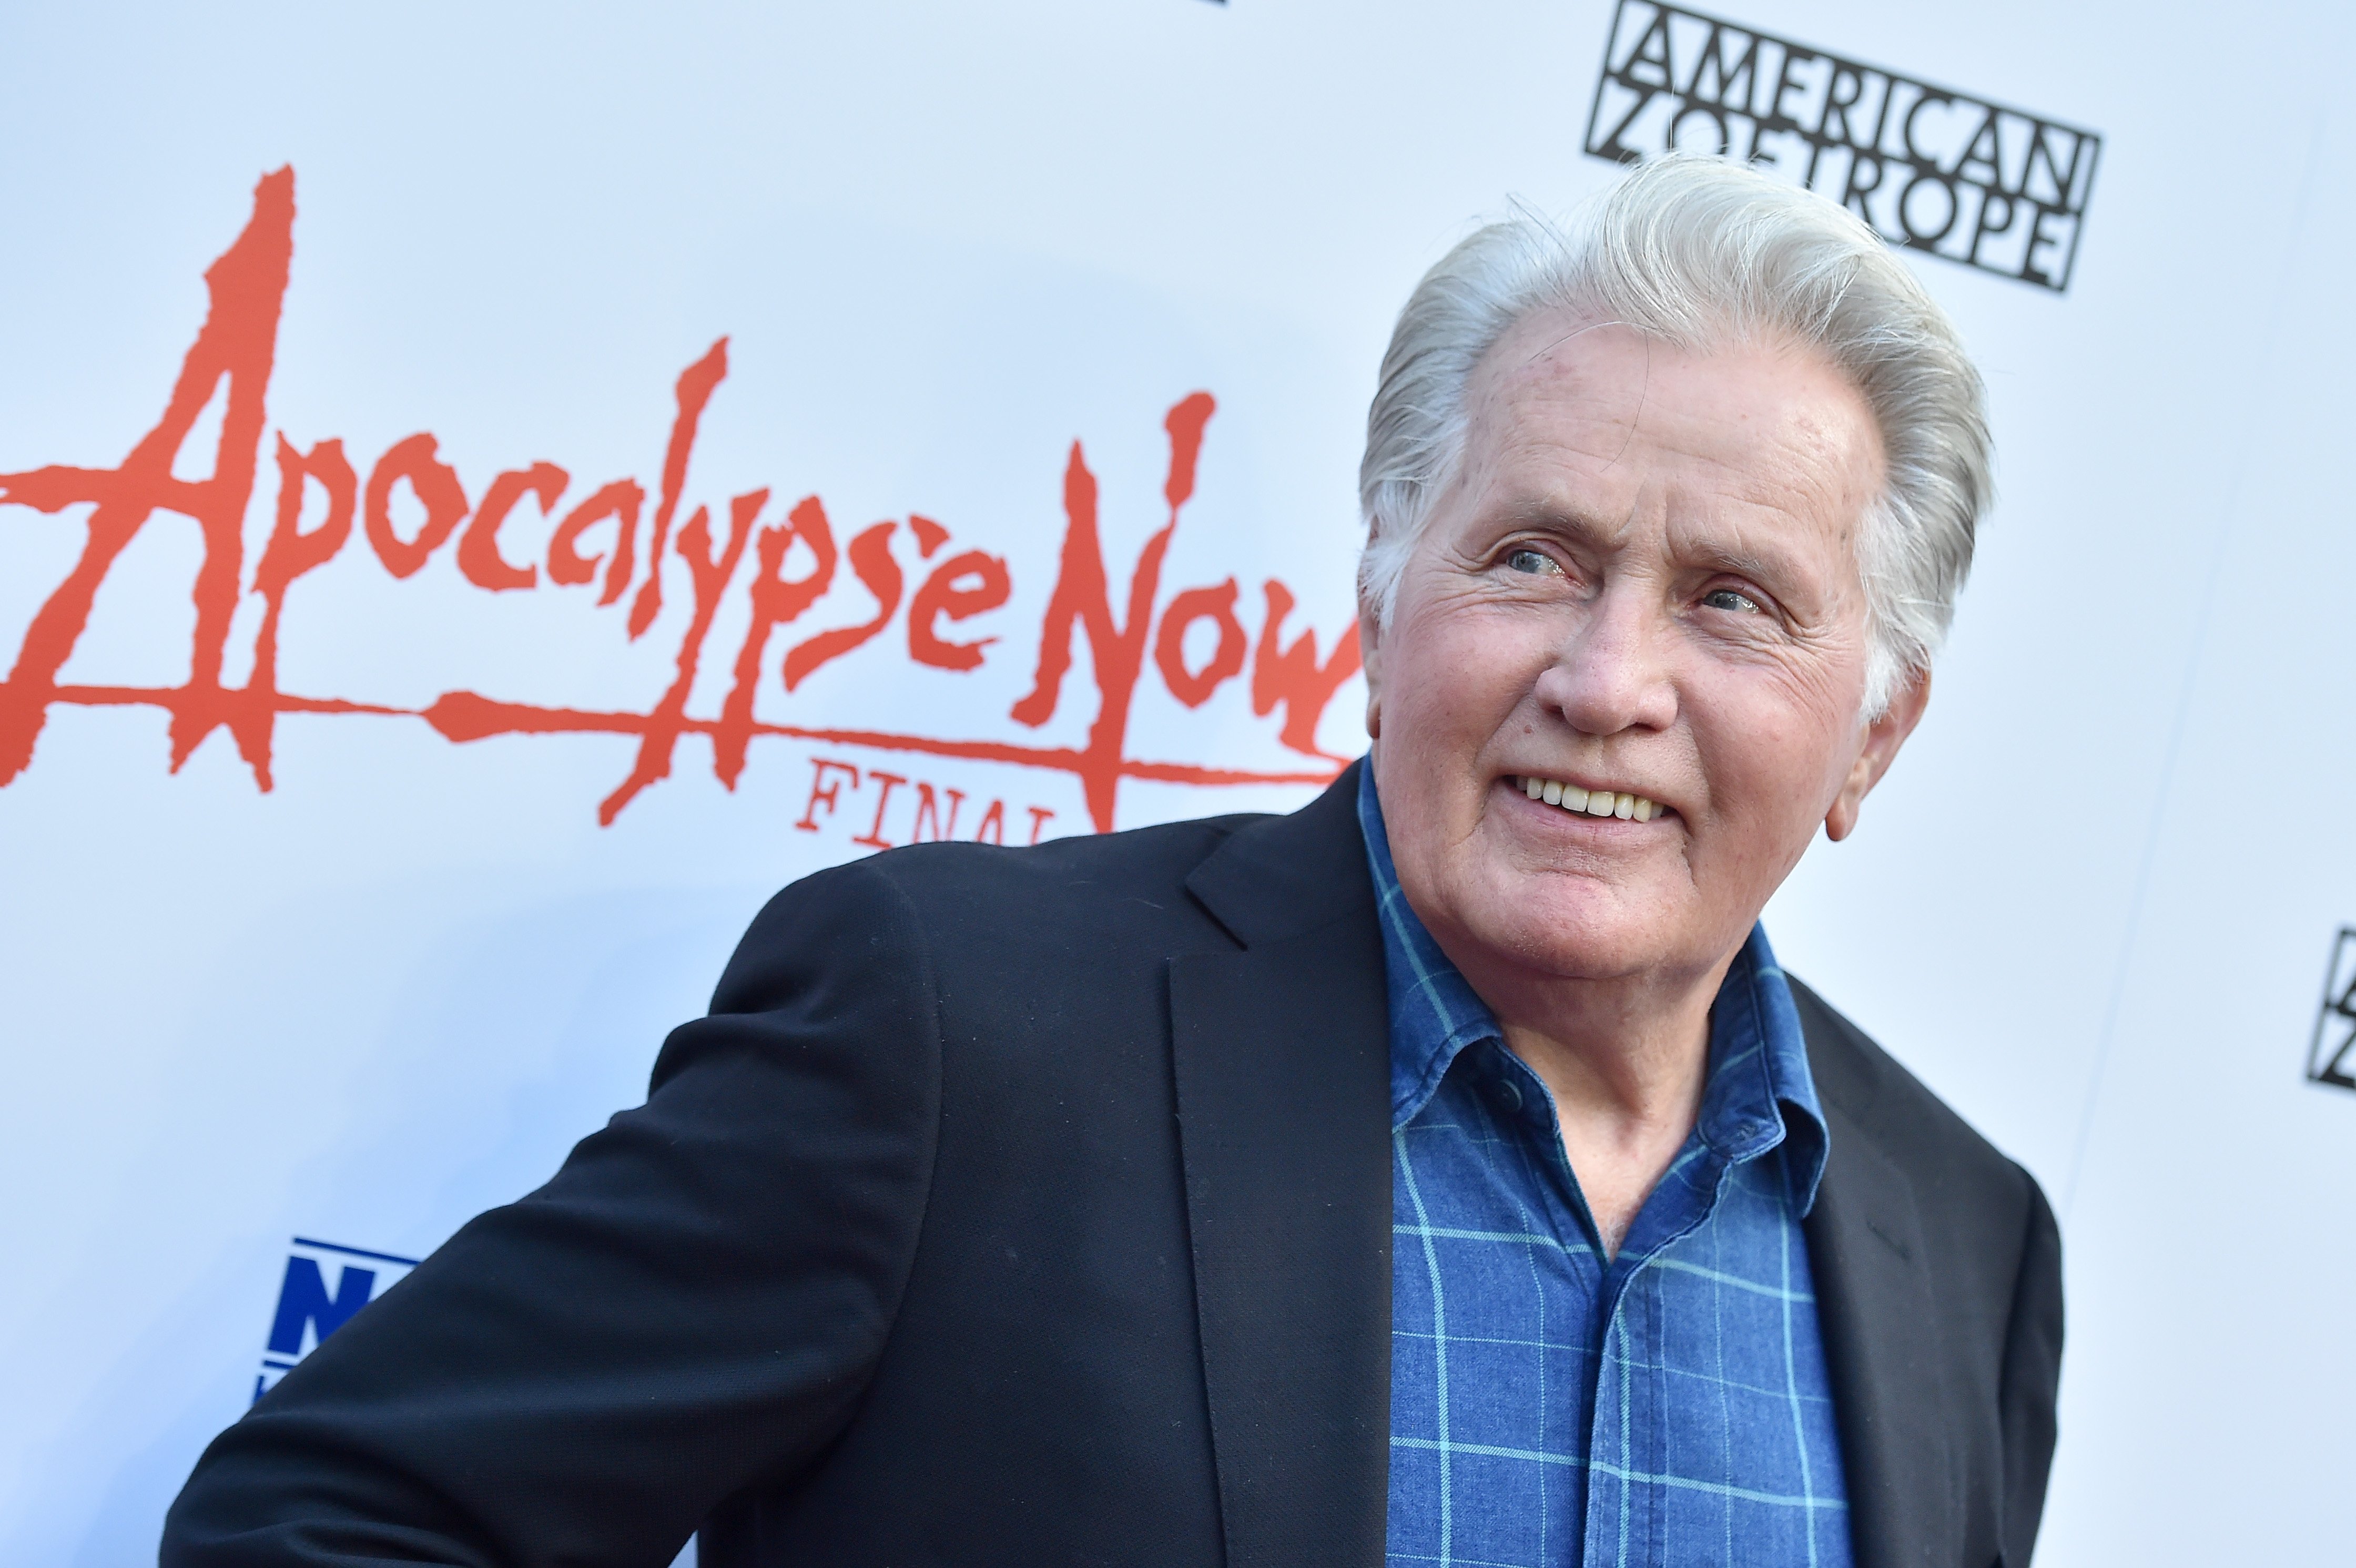 Martin Sheen in California in 2019. | Source: Getty Images 